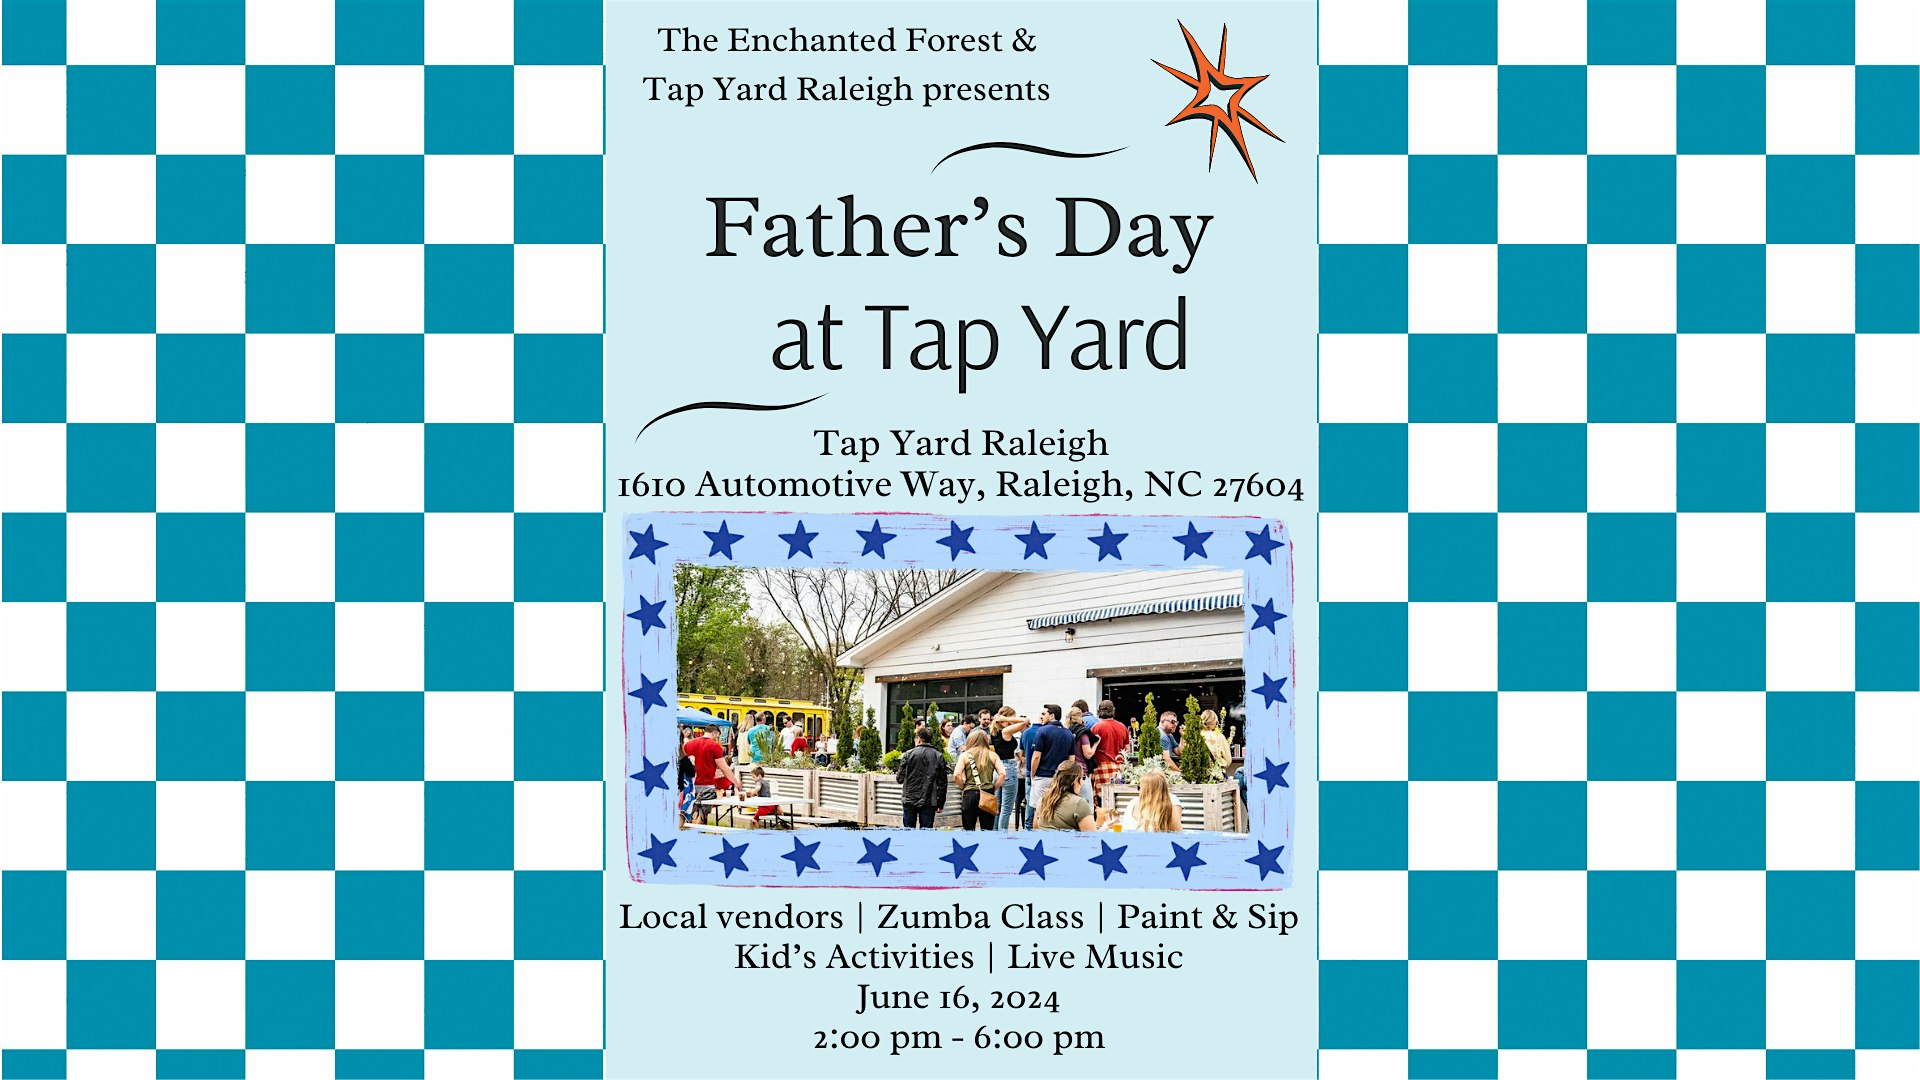 Father's Day at Tap Yard